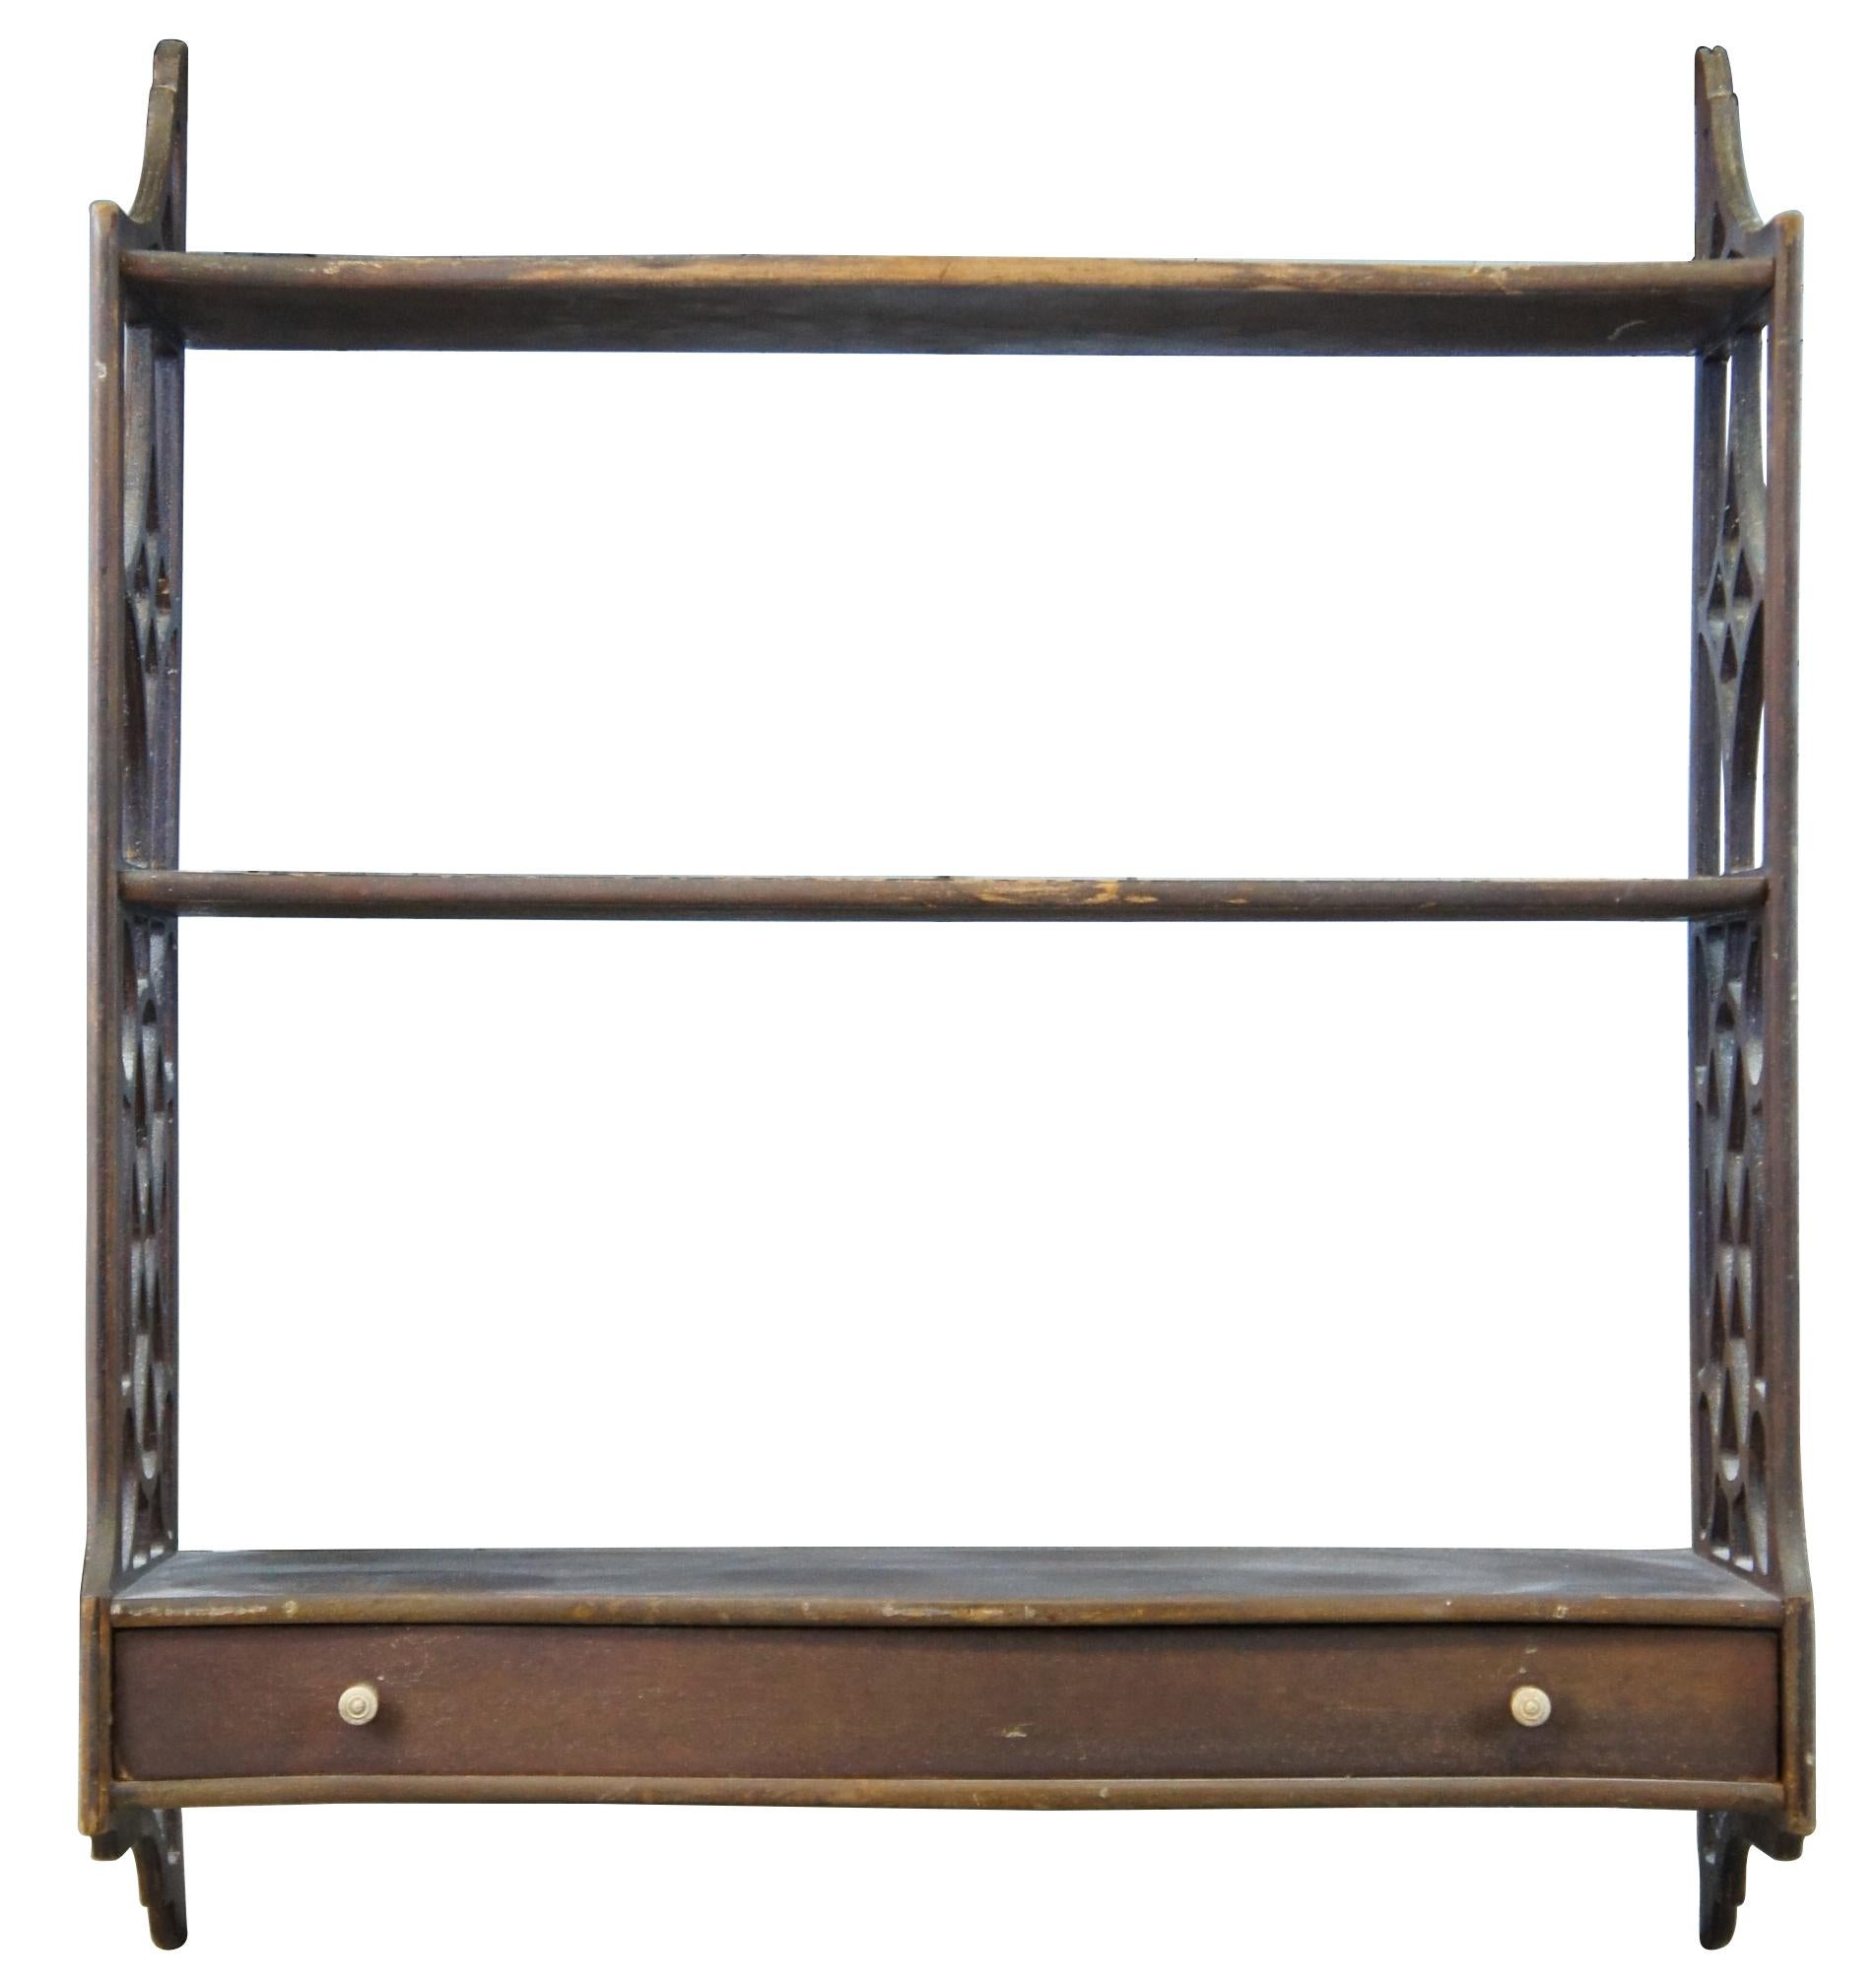 Mid 20th century Chippendale style Lewis Butler wall shelf, #131. A serpentine form made from mahogany with fretwork siding and lower drawer. 

Measures: 29.25